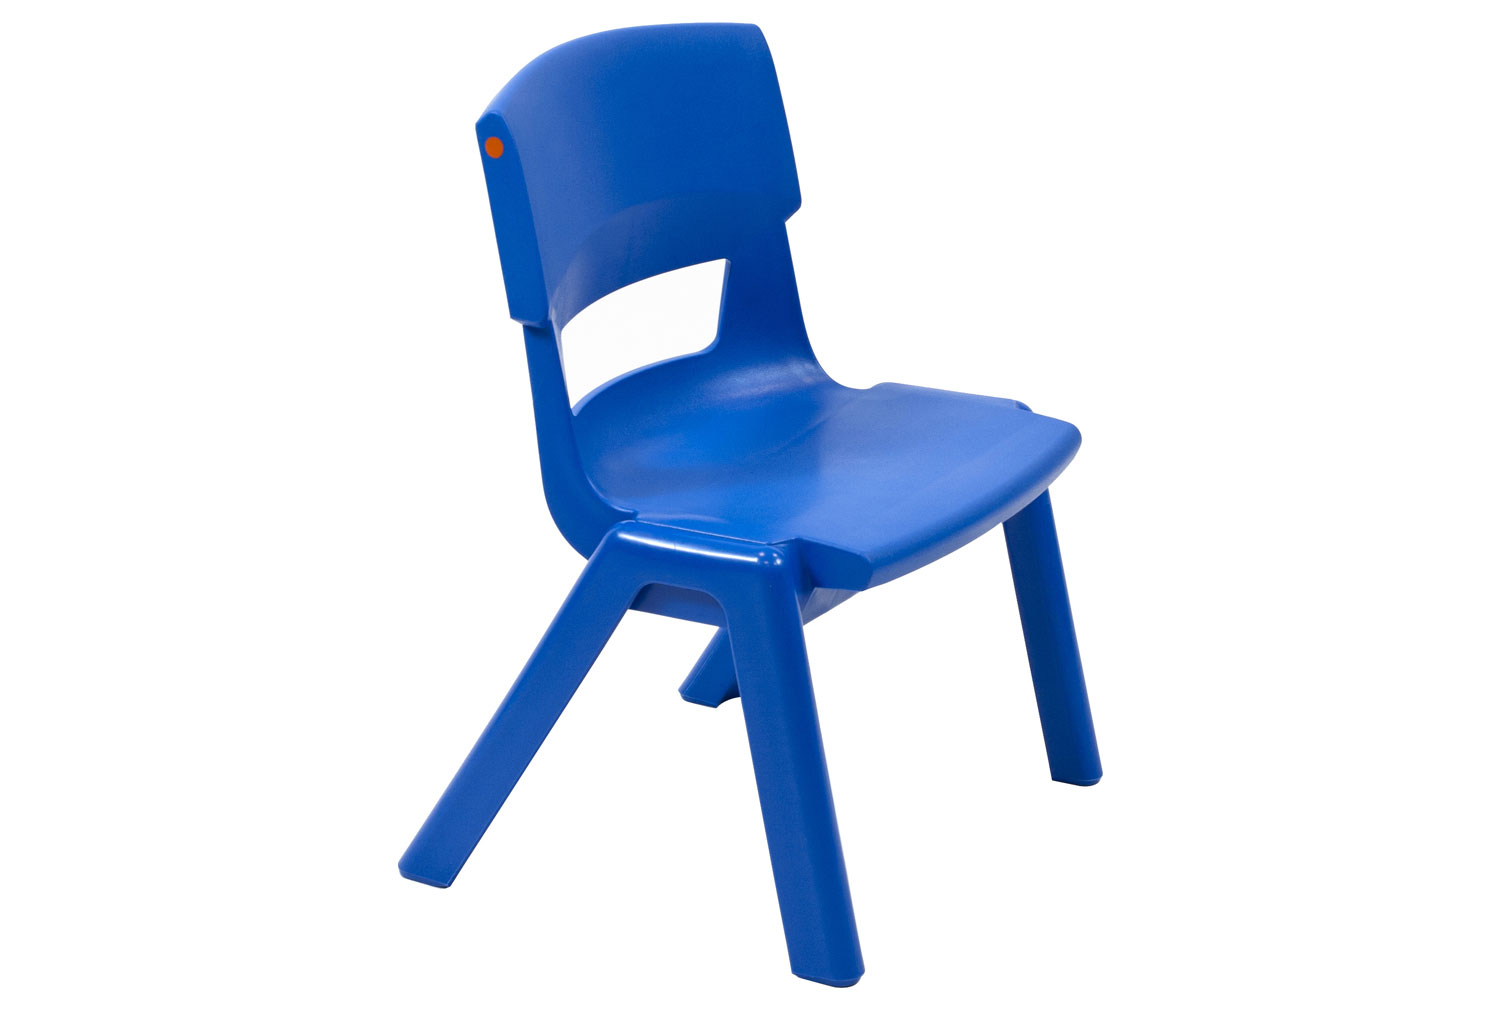 Qty 10 - Postura+ Classroom Chair, 3-4 Years - 28wx25dx26h (cm), Ink Blue